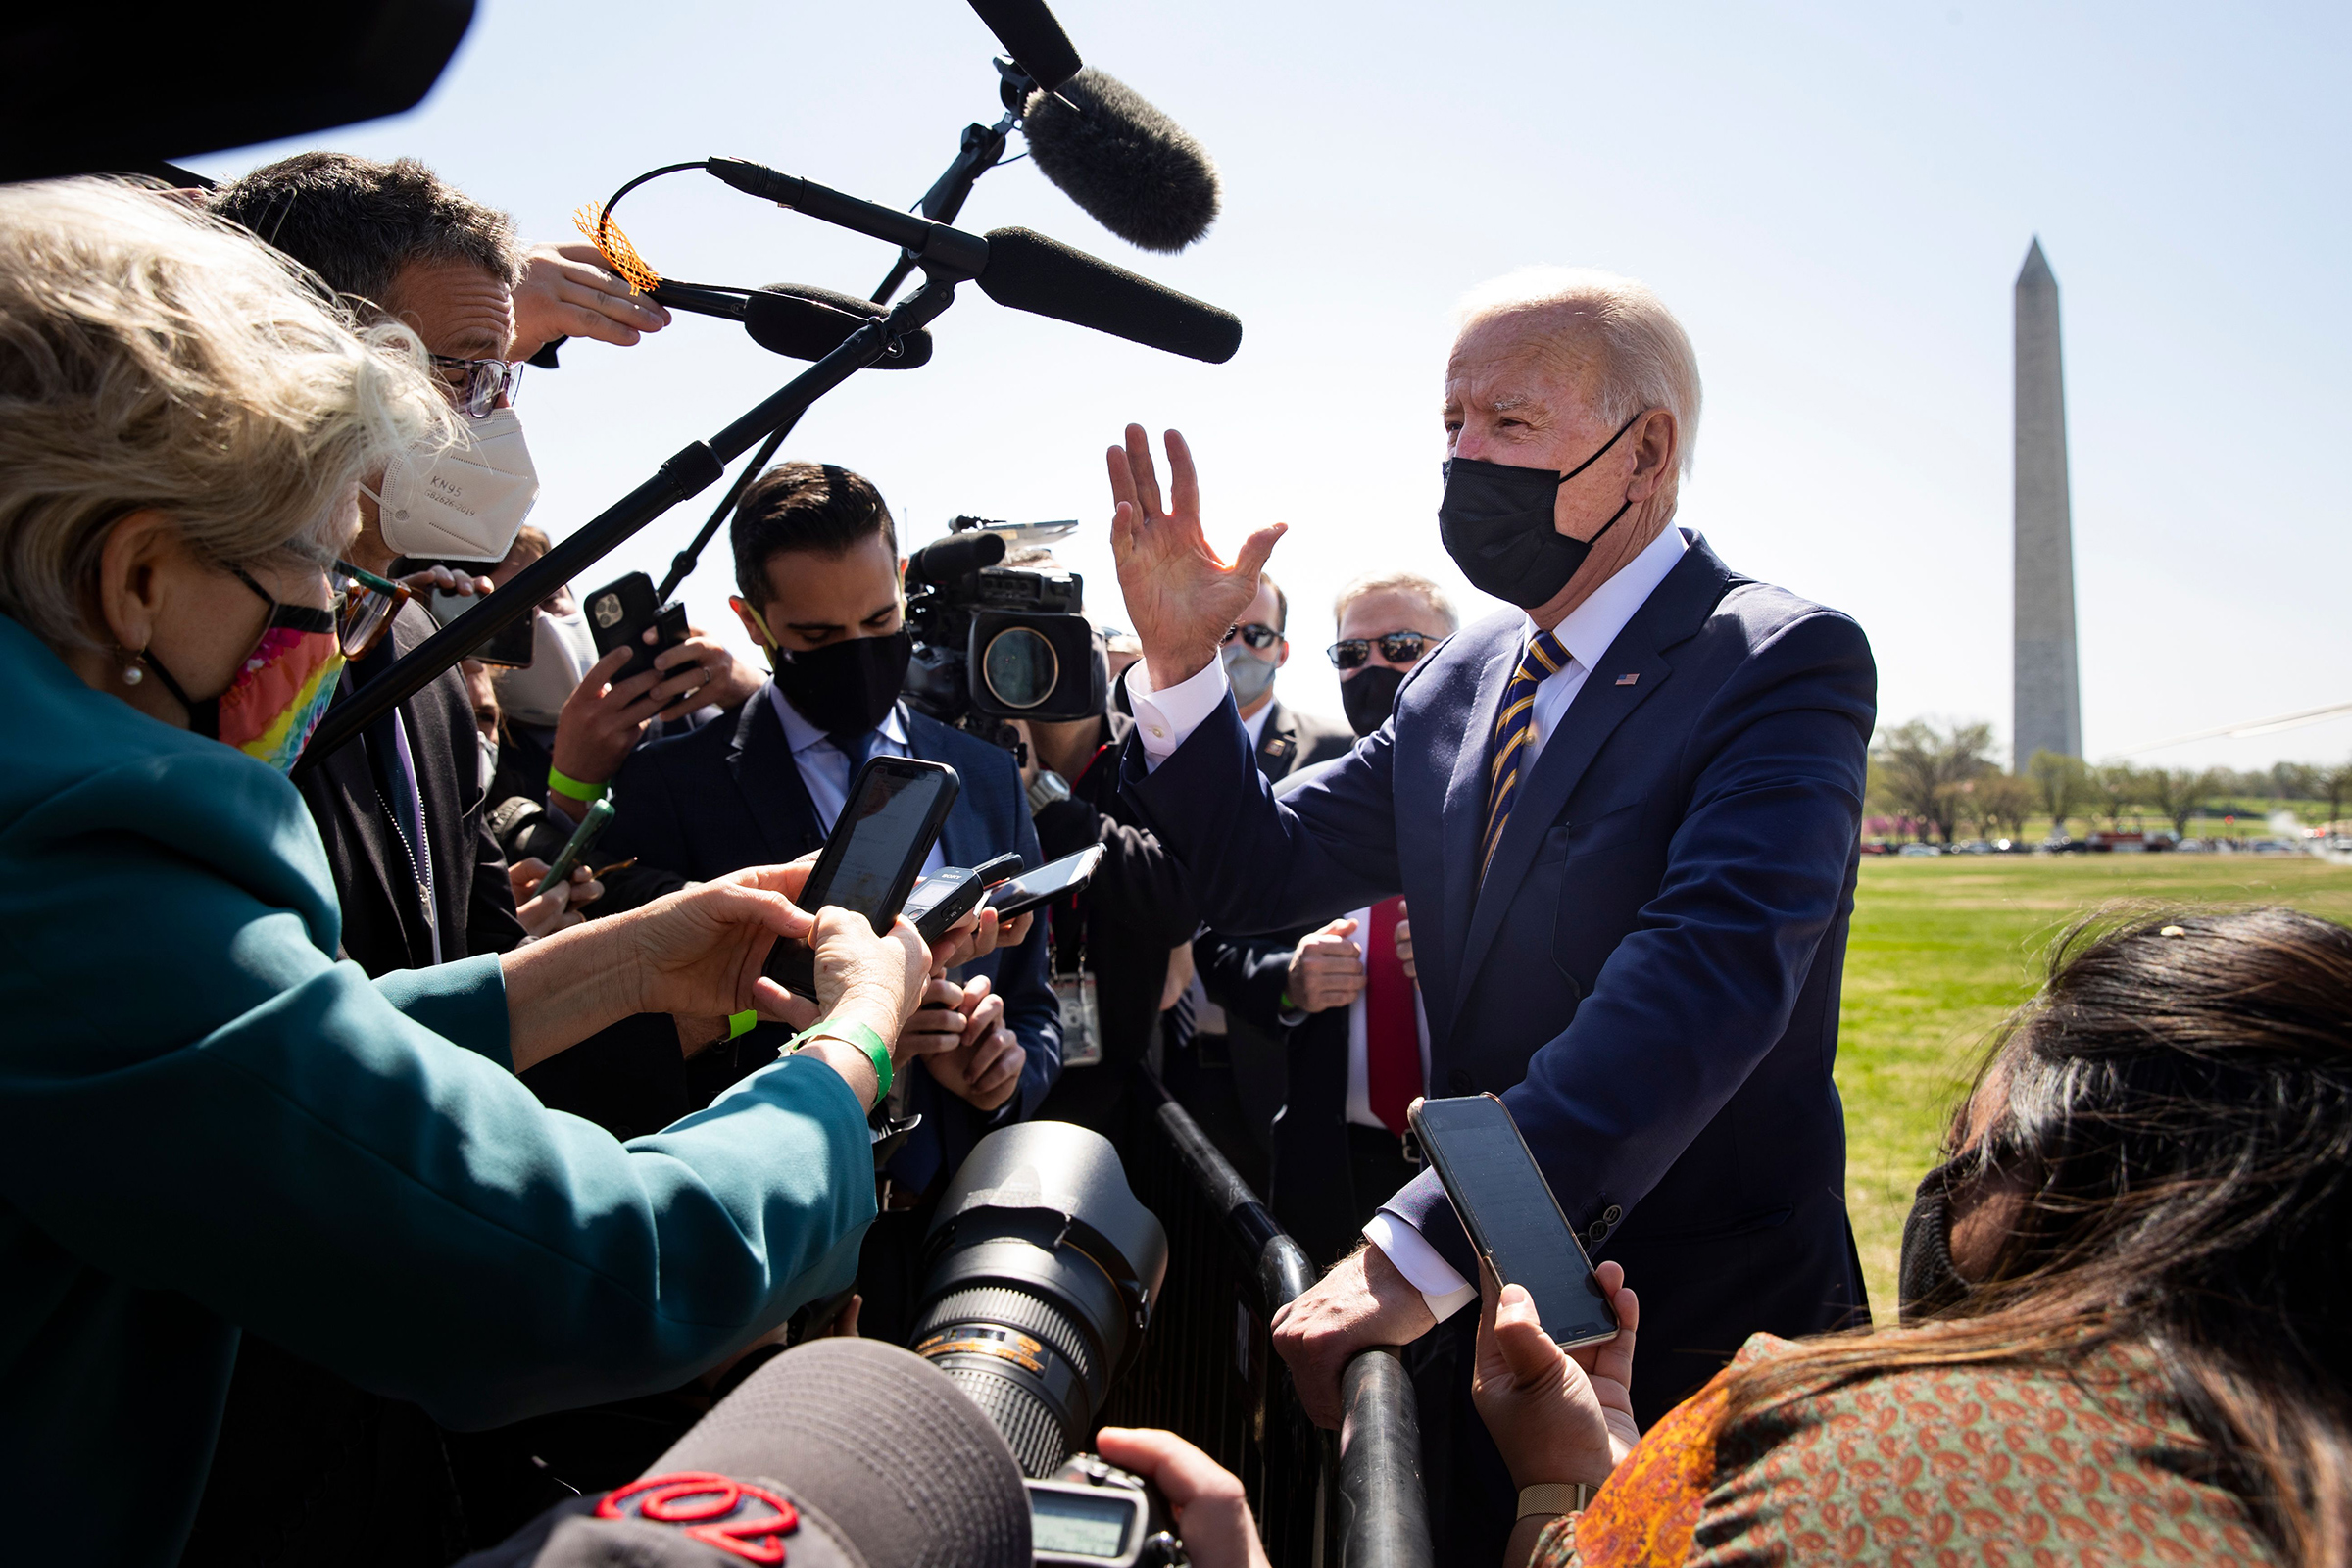 President Biden delivers brief remarks on infrastructure to journalists after arriving on the Ellipse by Marine One en route to the White House on April 5. (Michael Reynolds—POOL/EPA-EFE/Shutterstock)